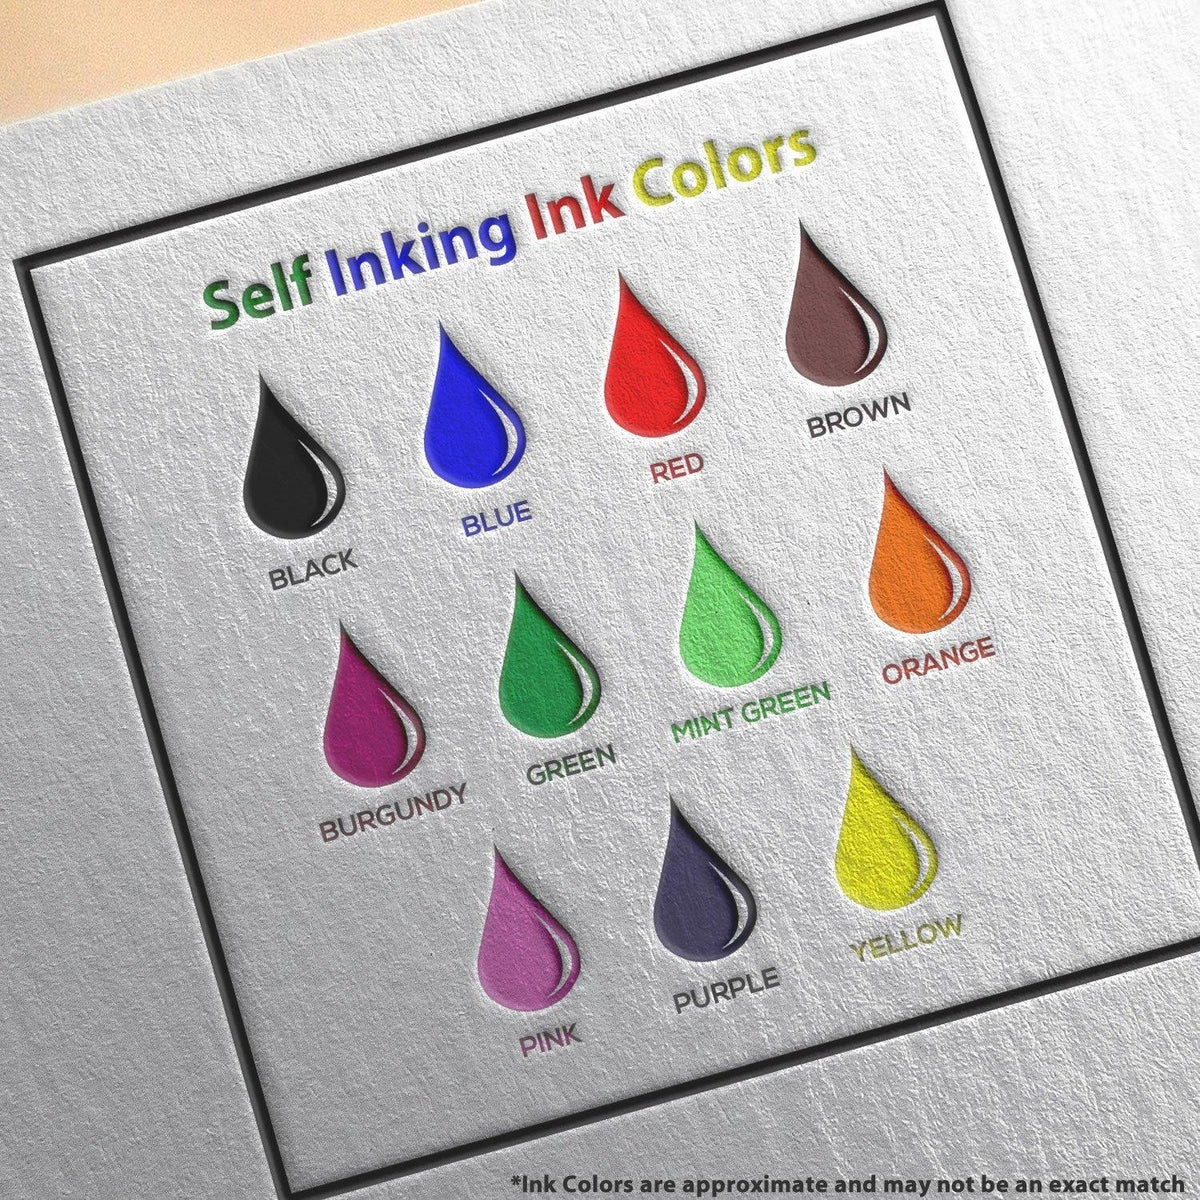 Large Self-Inking Confirmation of Phone Order Stamp Ink Color Options